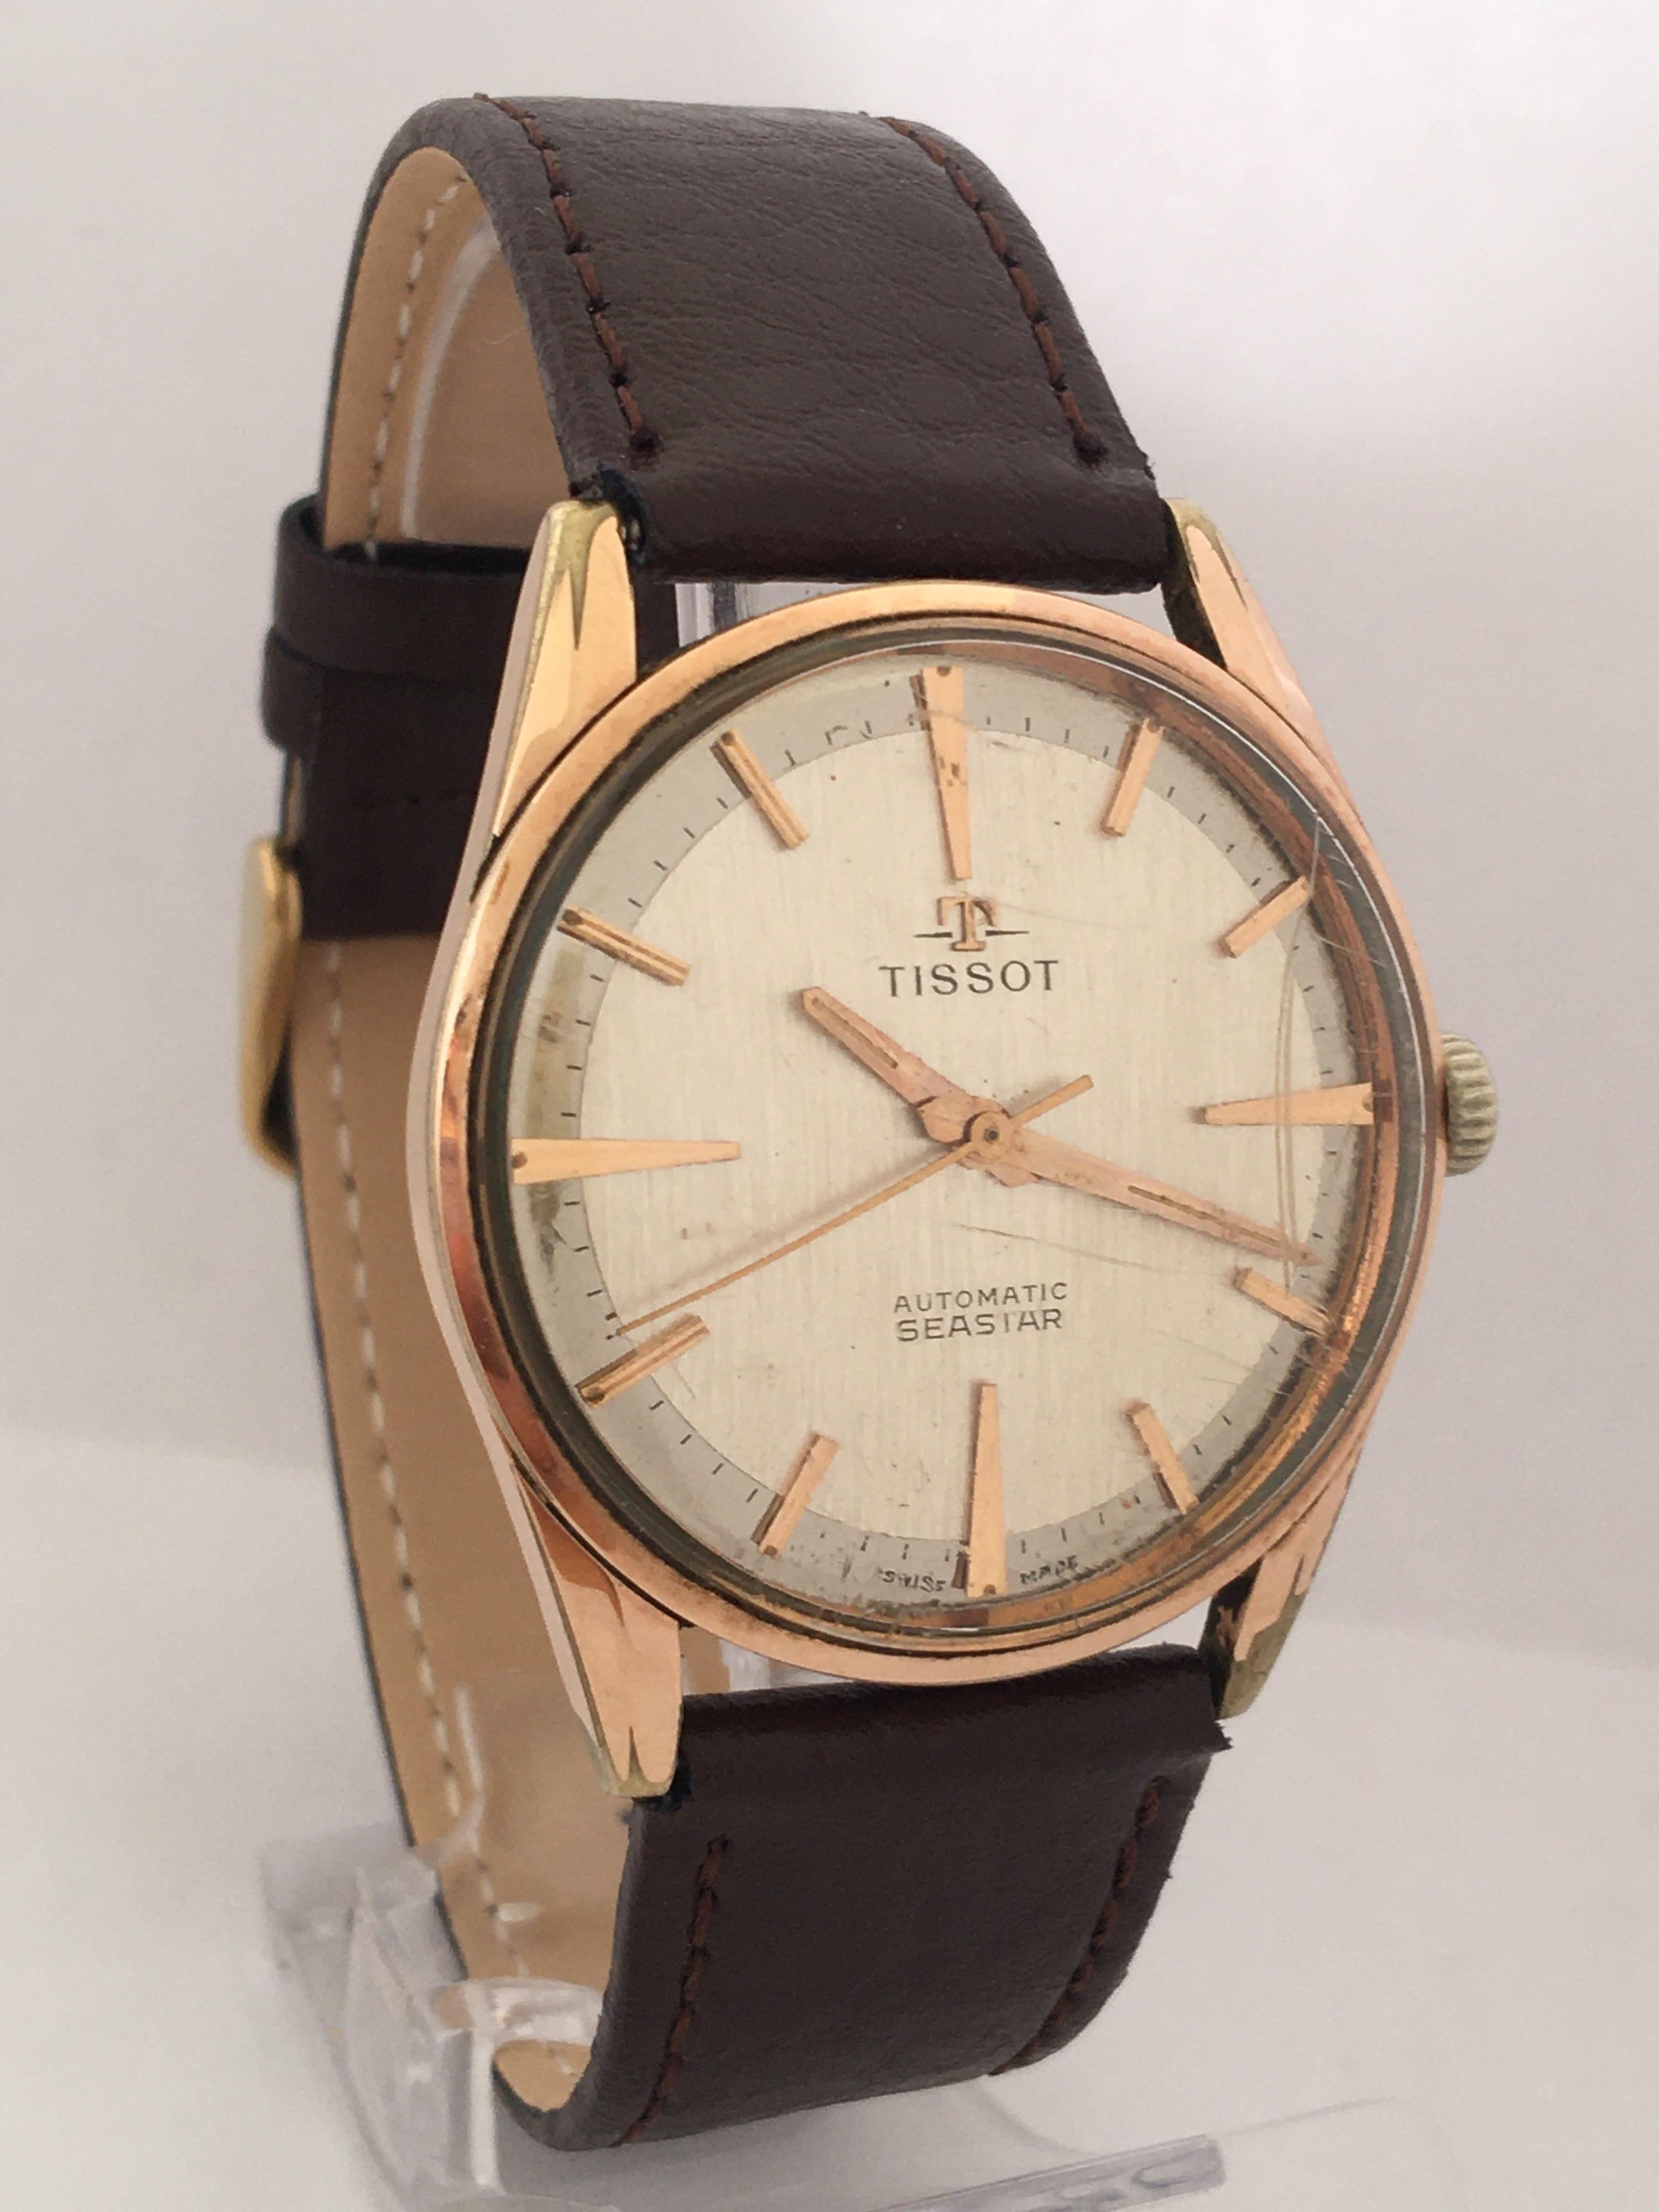 1960s TISSOT Automatic Seastar Gold-Plated Vintage Watch For Sale 3